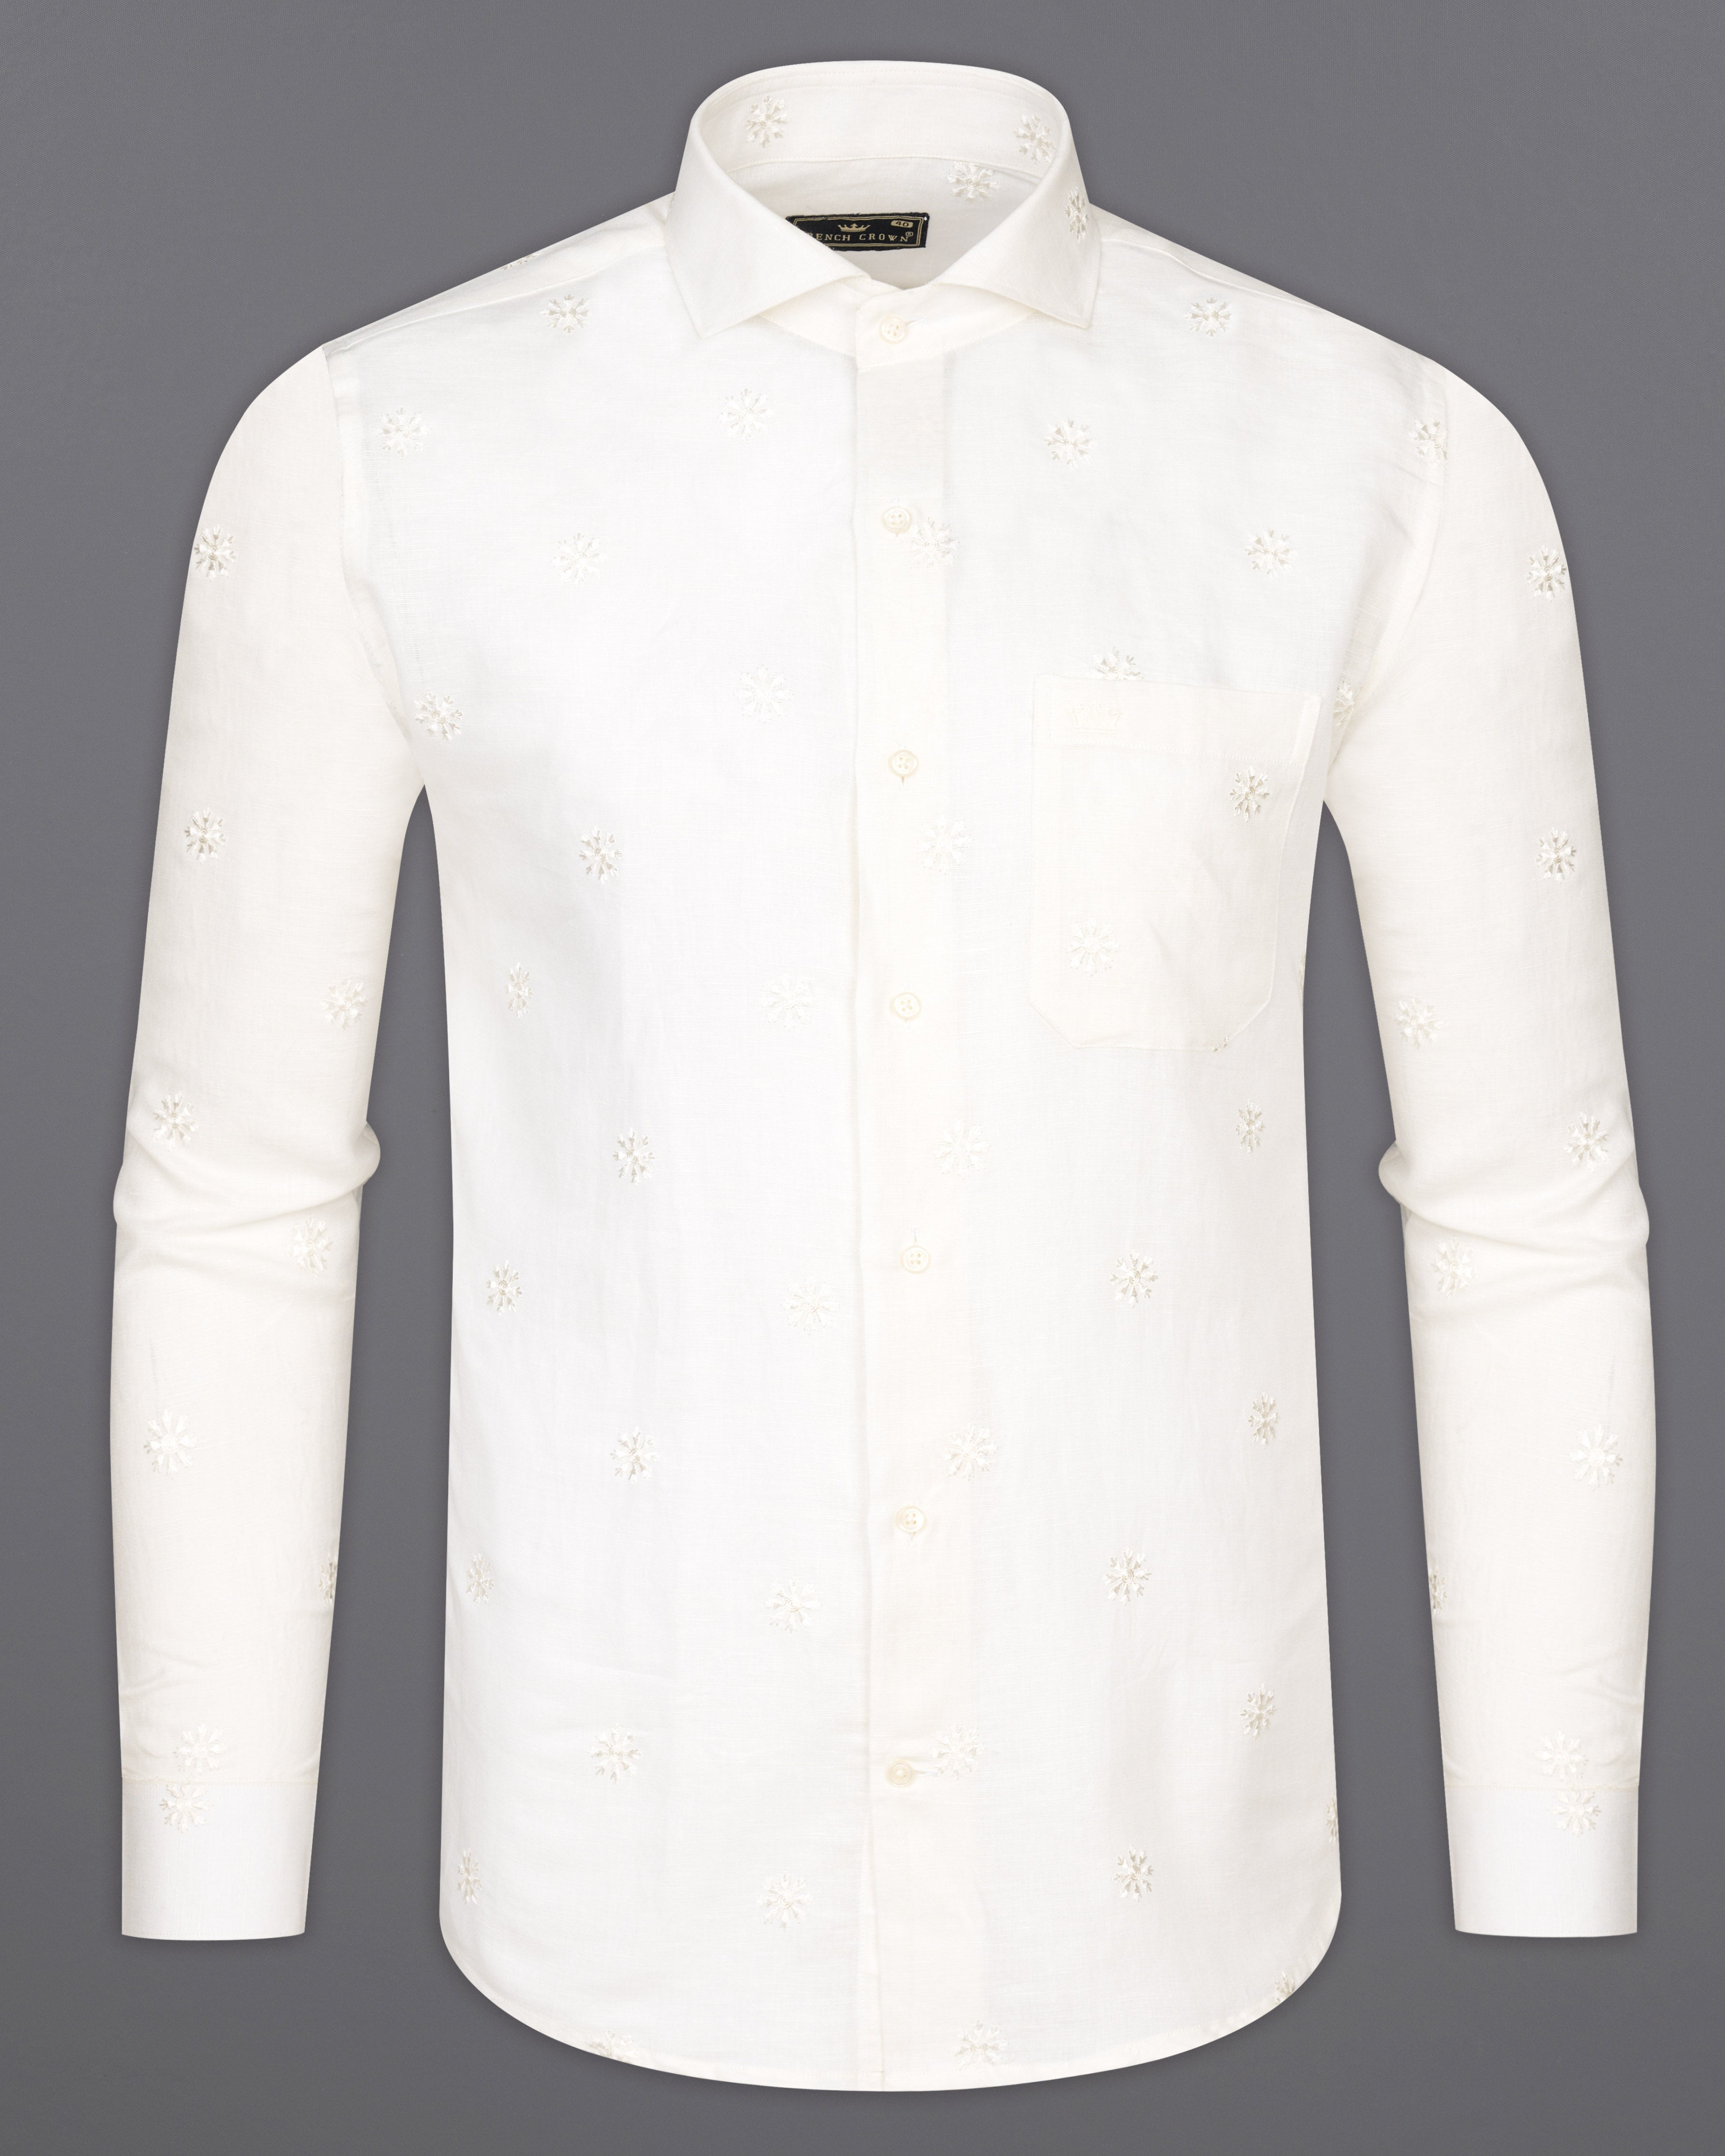 Bright White Embroidered Luxurious Linen Shirt 9713-CA-38, 9713-CA-H-38, 9713-CA-39, 9713-CA-H-39, 9713-CA-40, 9713-CA-H-40, 9713-CA-42, 9713-CA-H-42, 9713-CA-44, 9713-CA-H-44, 9713-CA-46, 9713-CA-H-46, 9713-CA-48, 9713-CA-H-48, 9713-CA-50, 9713-CA-H-50, 9713-CA-52, 9713-CA-H-52